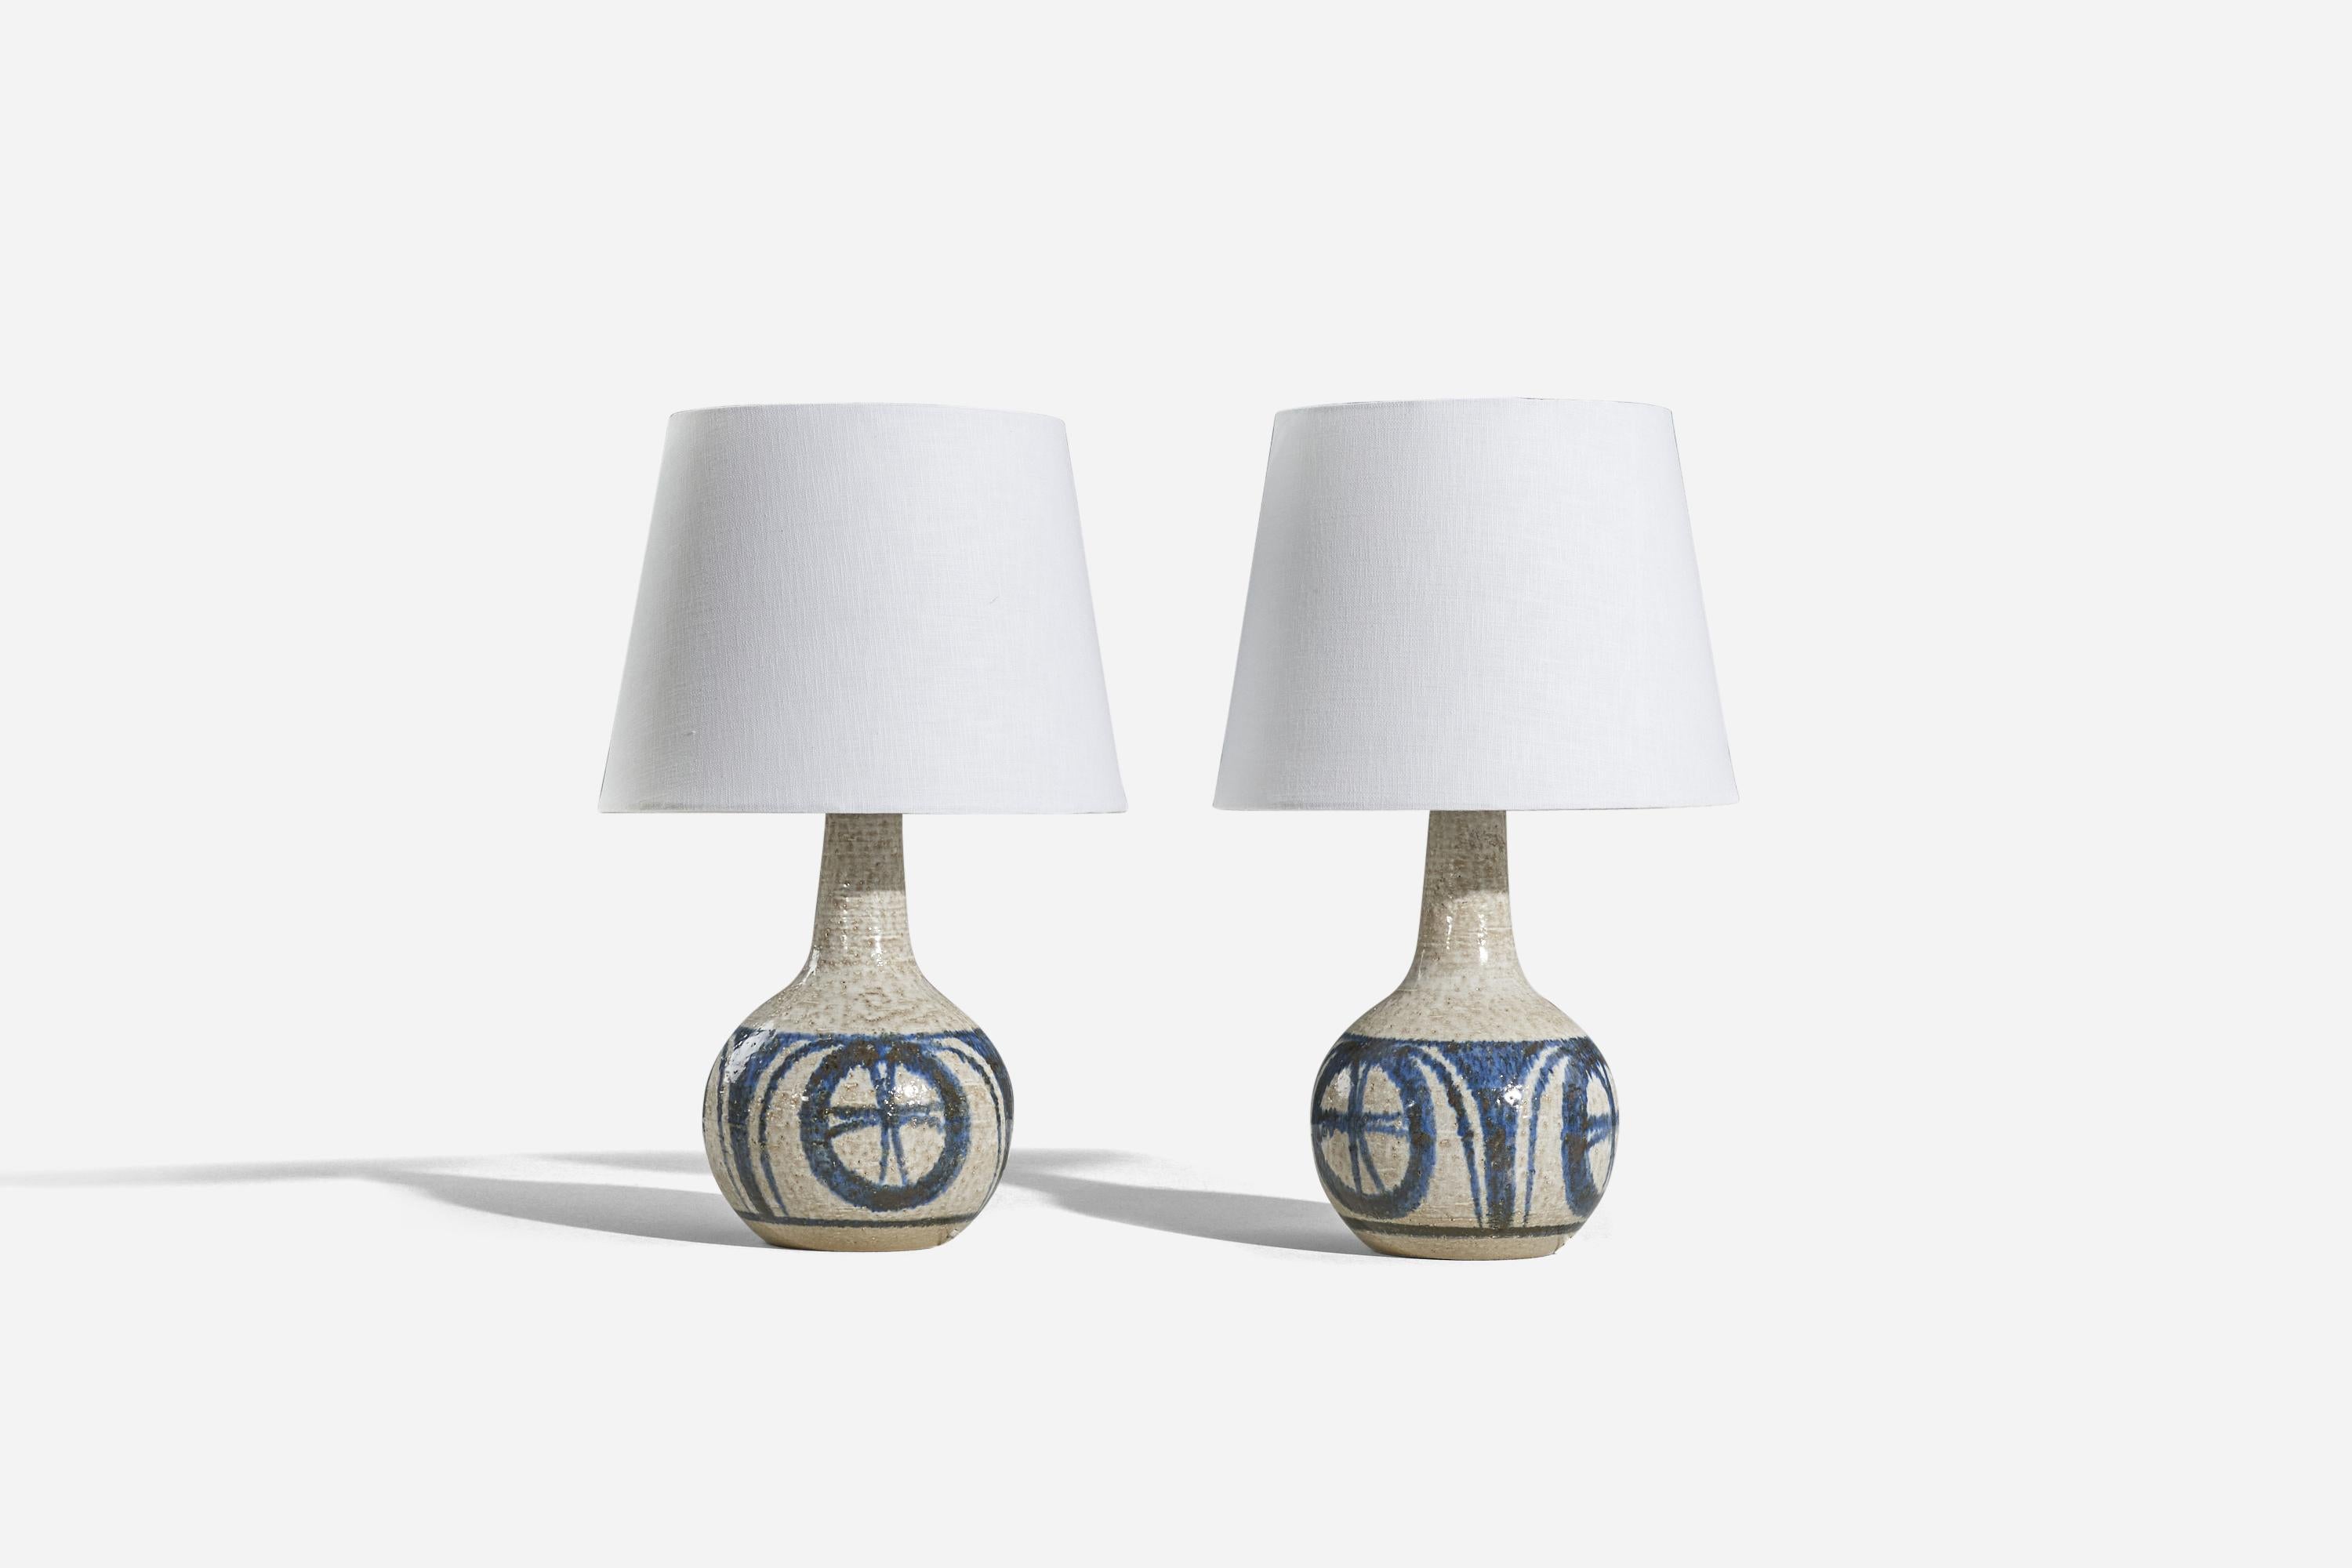 A pair of blue and gray, glazed stoneware table lamp designed and produced by Søholm Stentøj, Bornholm, Denmark, 1960s. 

Sold without lampshade. 
Dimensions of Lamp (inches) : 13.25 x 7.06 x 7.06 (H x W x D)
Dimensions of Shade (inches) : 9 x